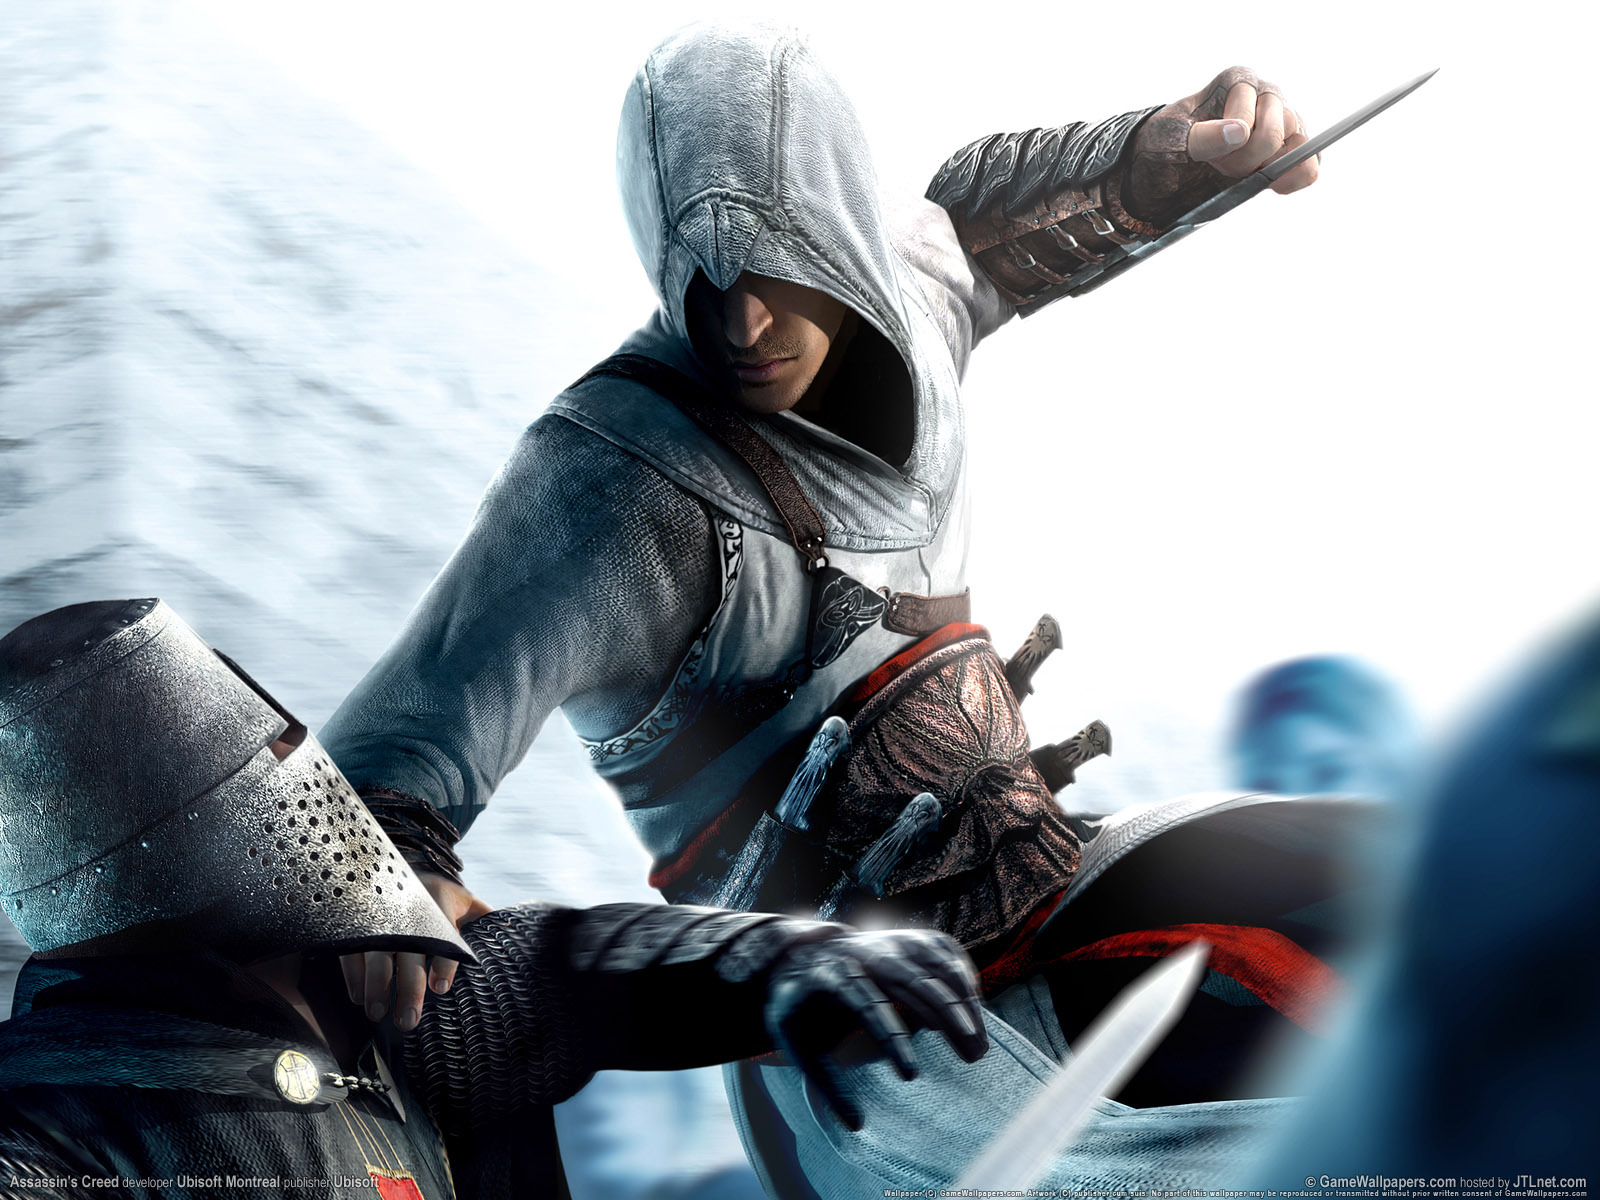 Download PC Wallpaper assassin's creed, games